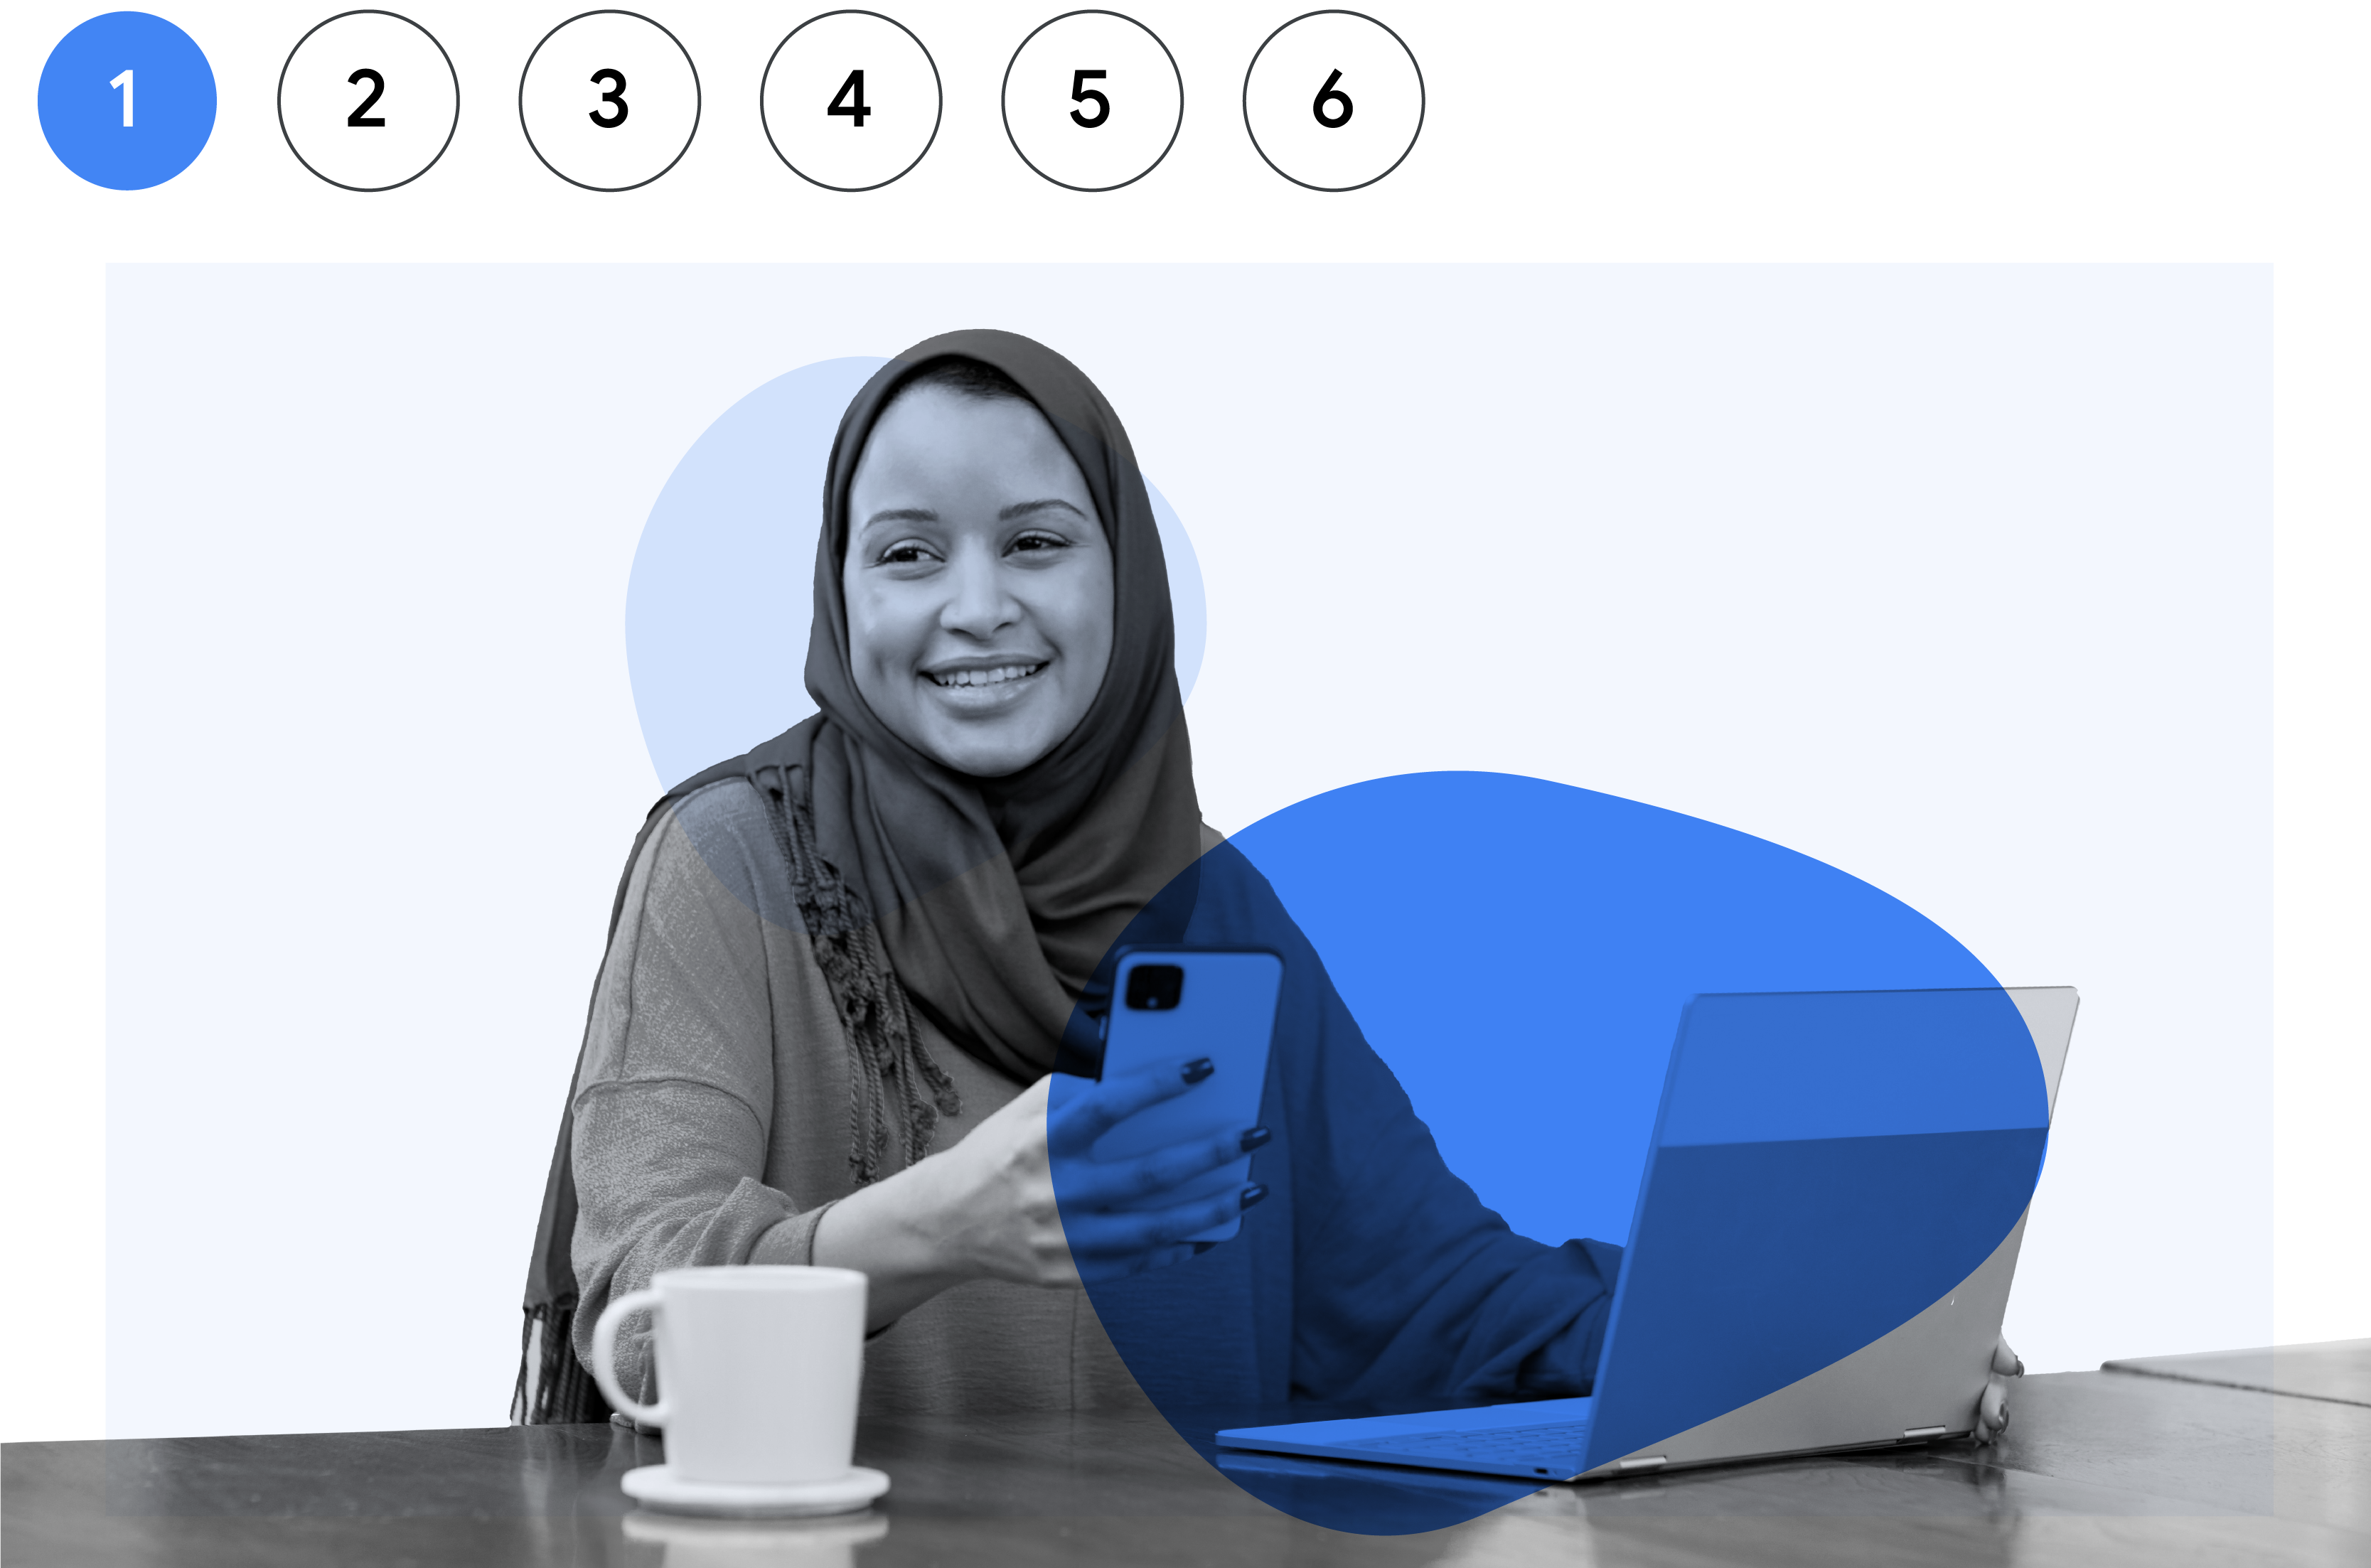 A woman of color wearing a hijab smiles as she holds her smartphone.